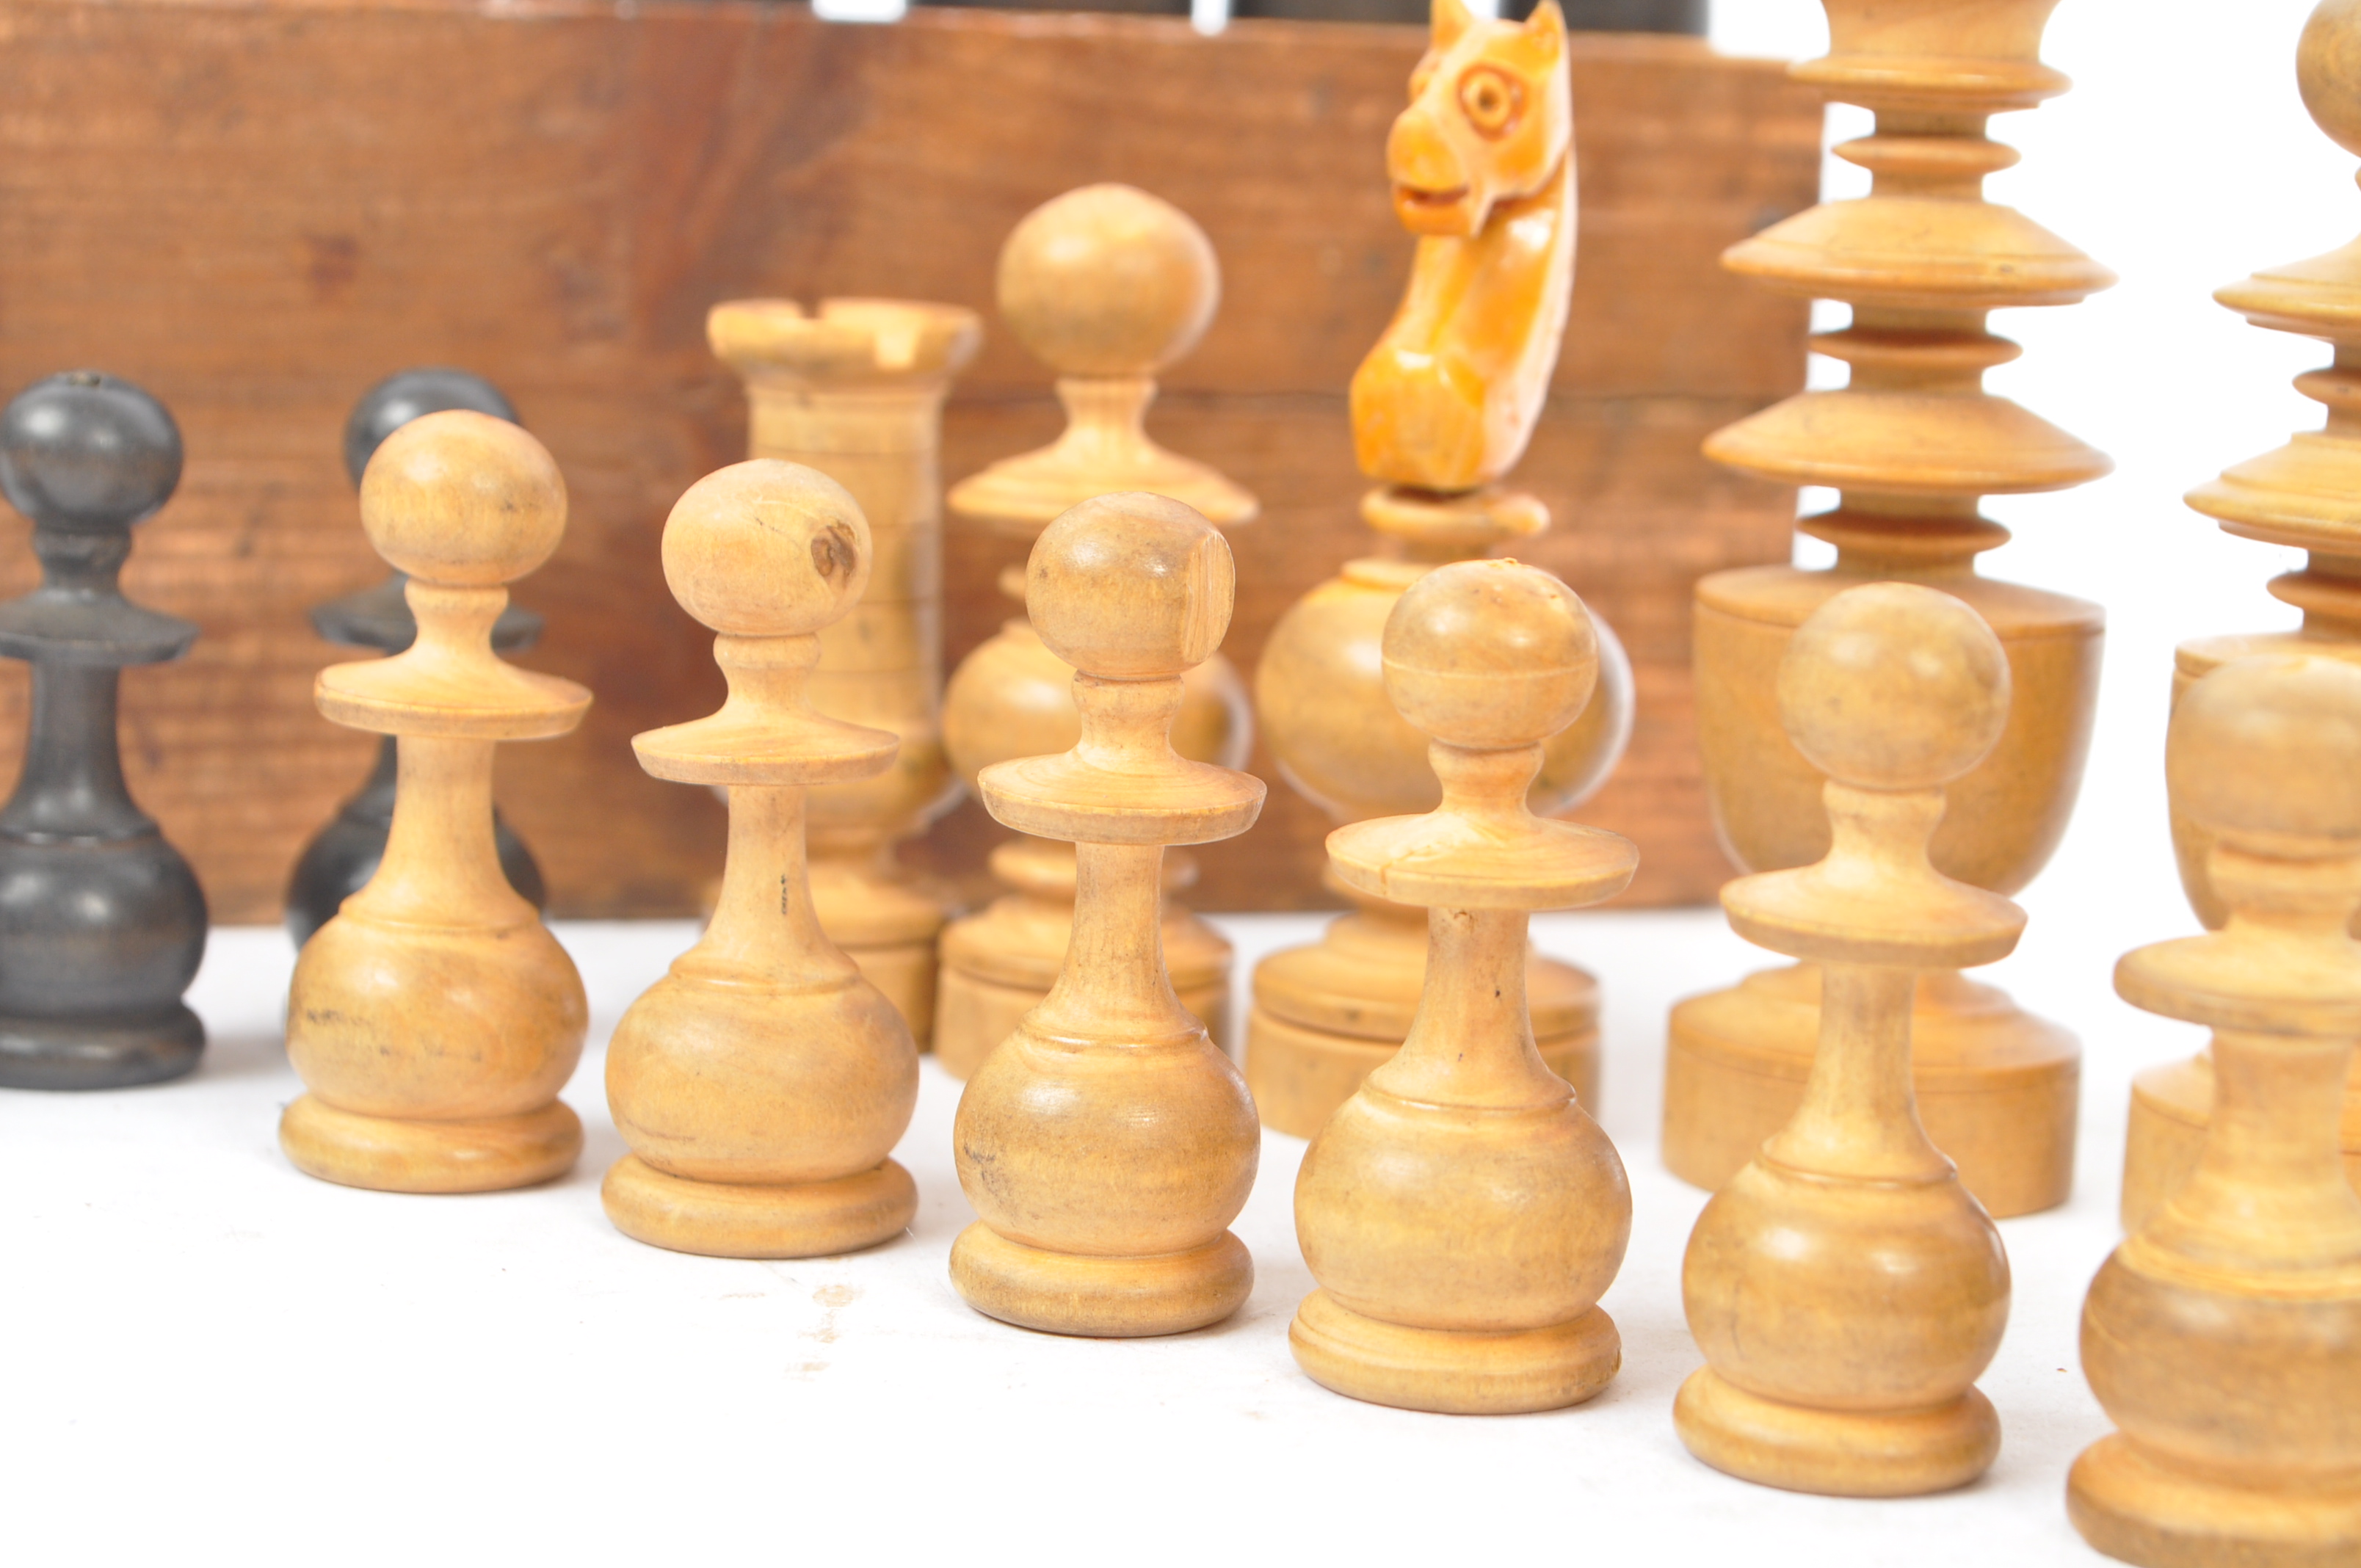 EARLY 20TH CENTURY TURNED WOODEN CHESS SET - Image 5 of 7